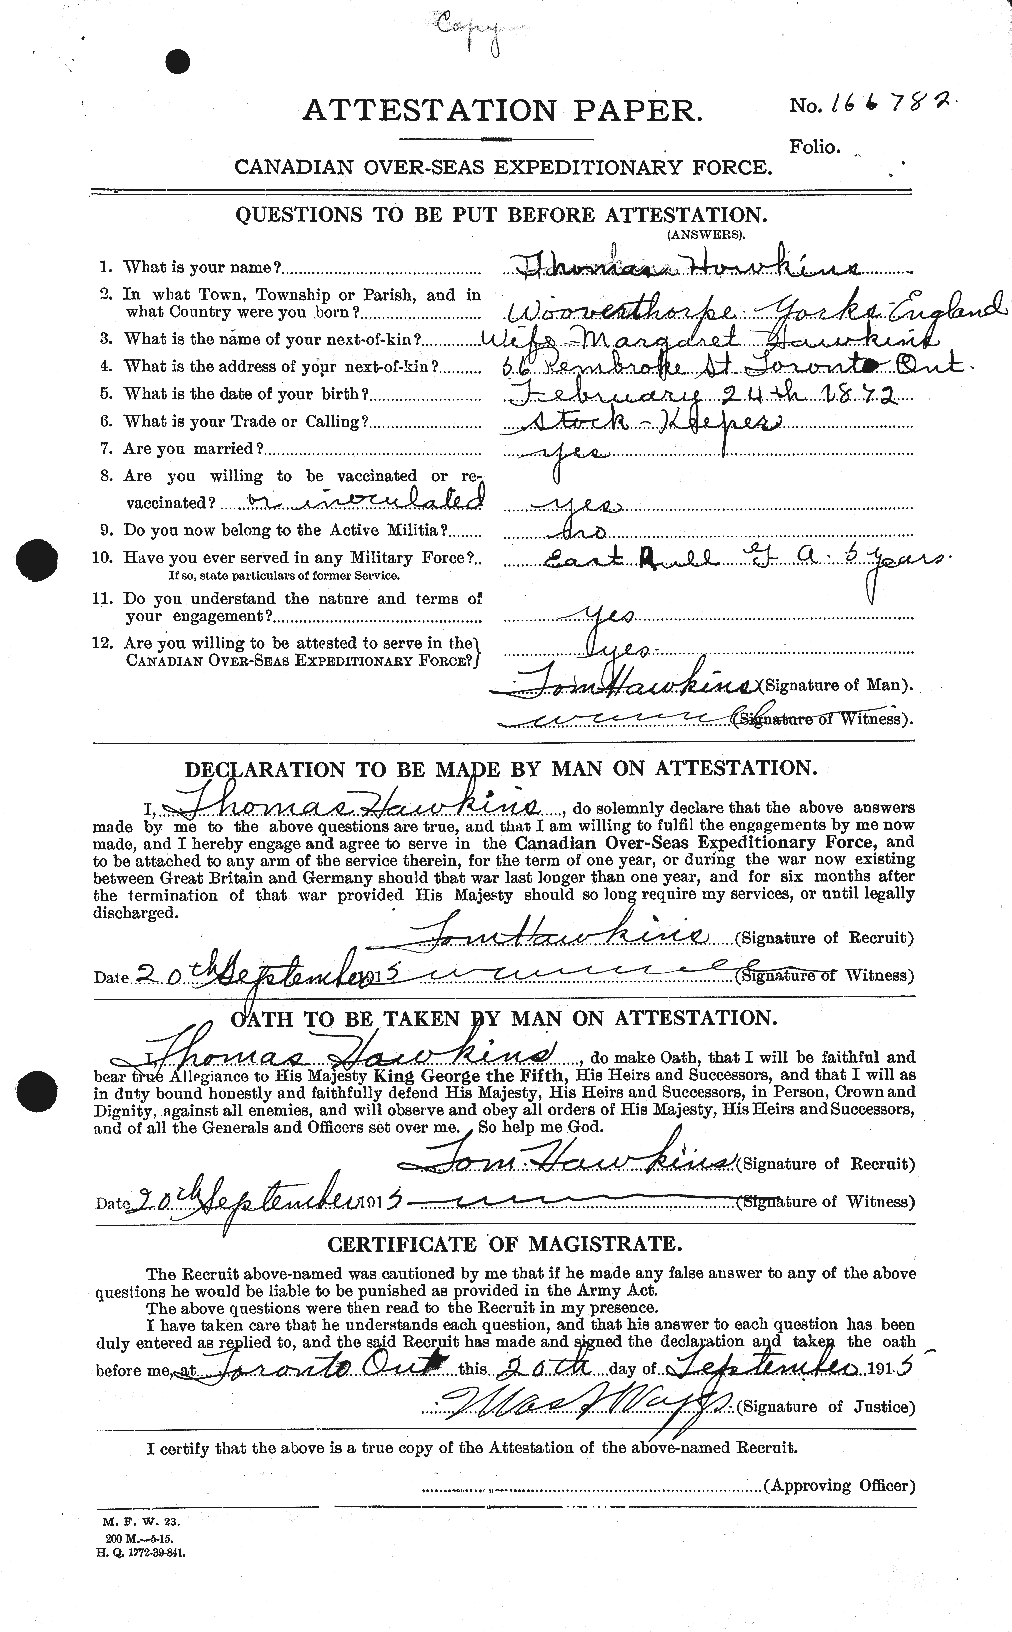 Personnel Records of the First World War - CEF 385619a